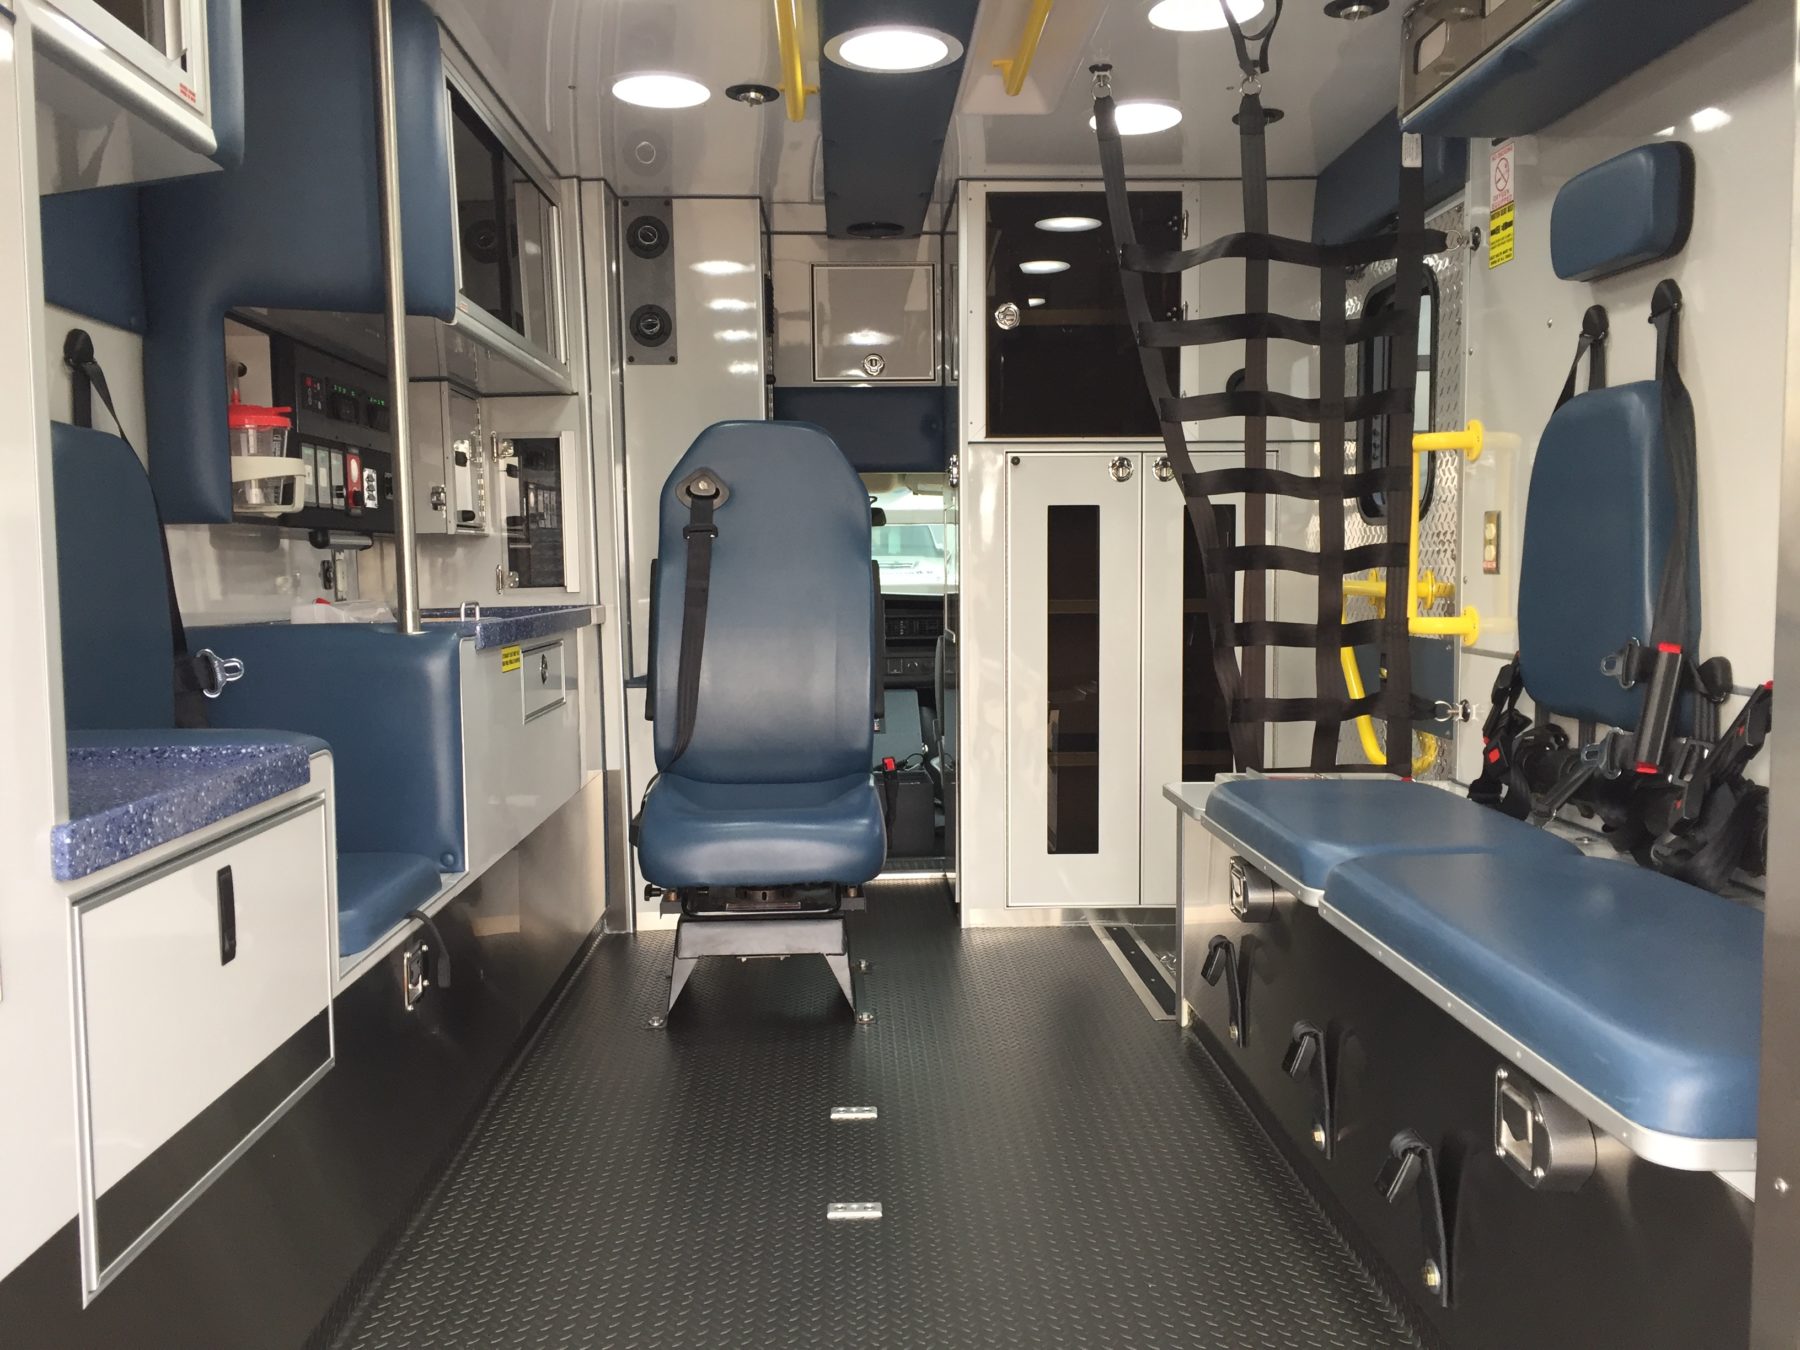 2017 Chevrolet G4500 Type 3 Ambulance For Sale – Picture 2